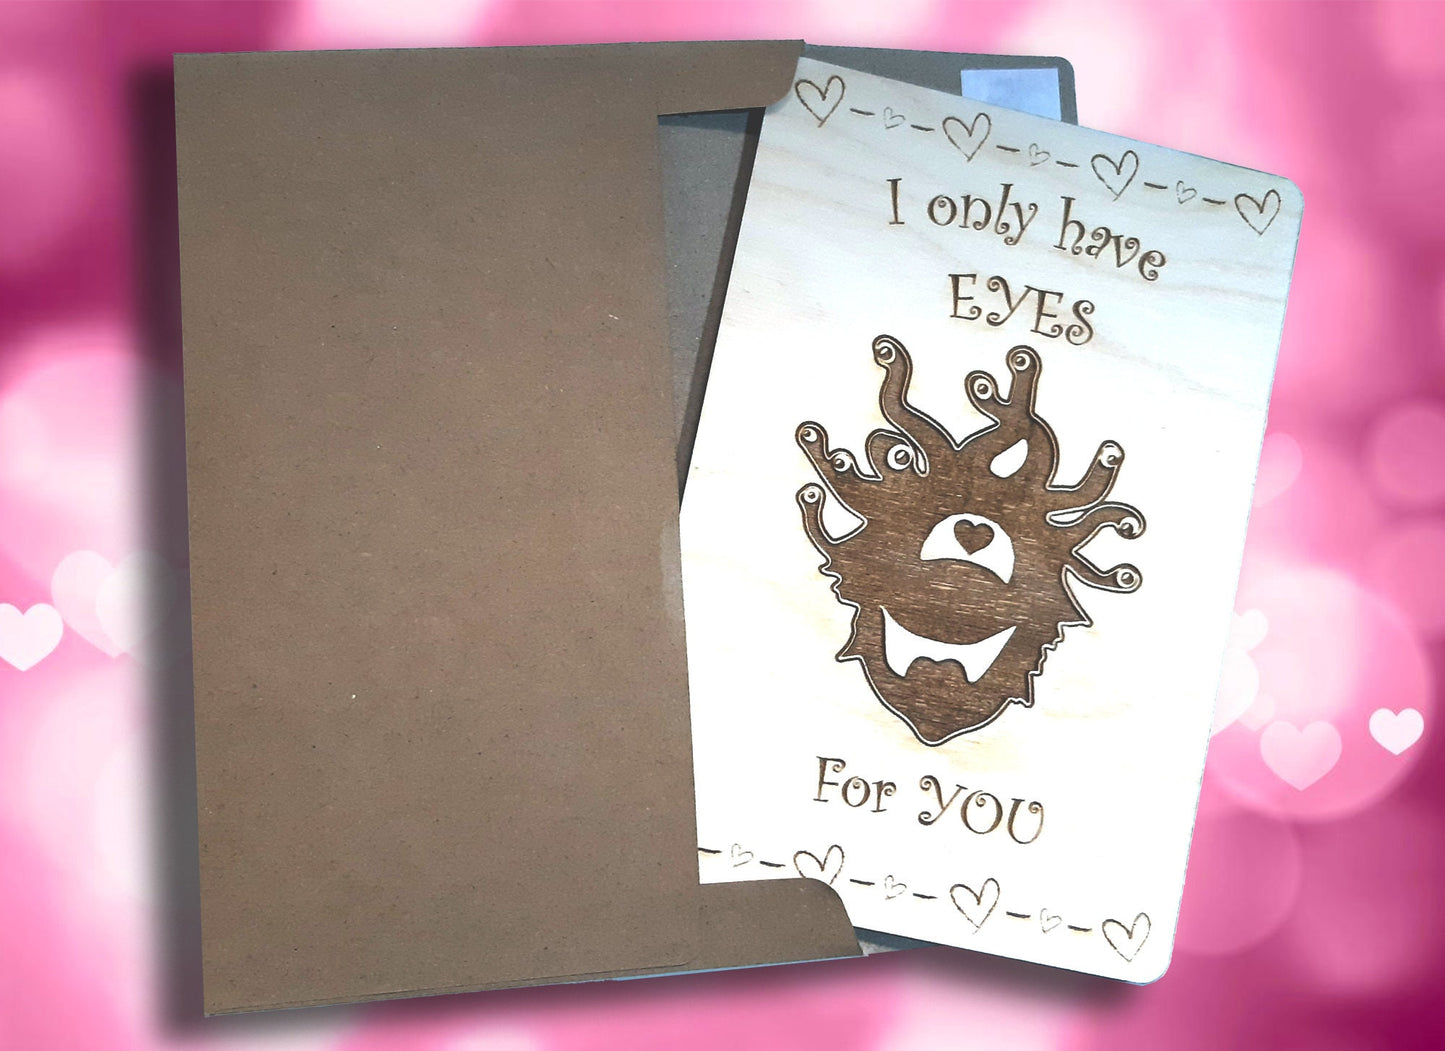 Valentine/Anniversary Card - I Only Have Eyes For You RPG Gaming Clever VDay card, engraved wood, gamer gift, rpg, role-playing games d&d